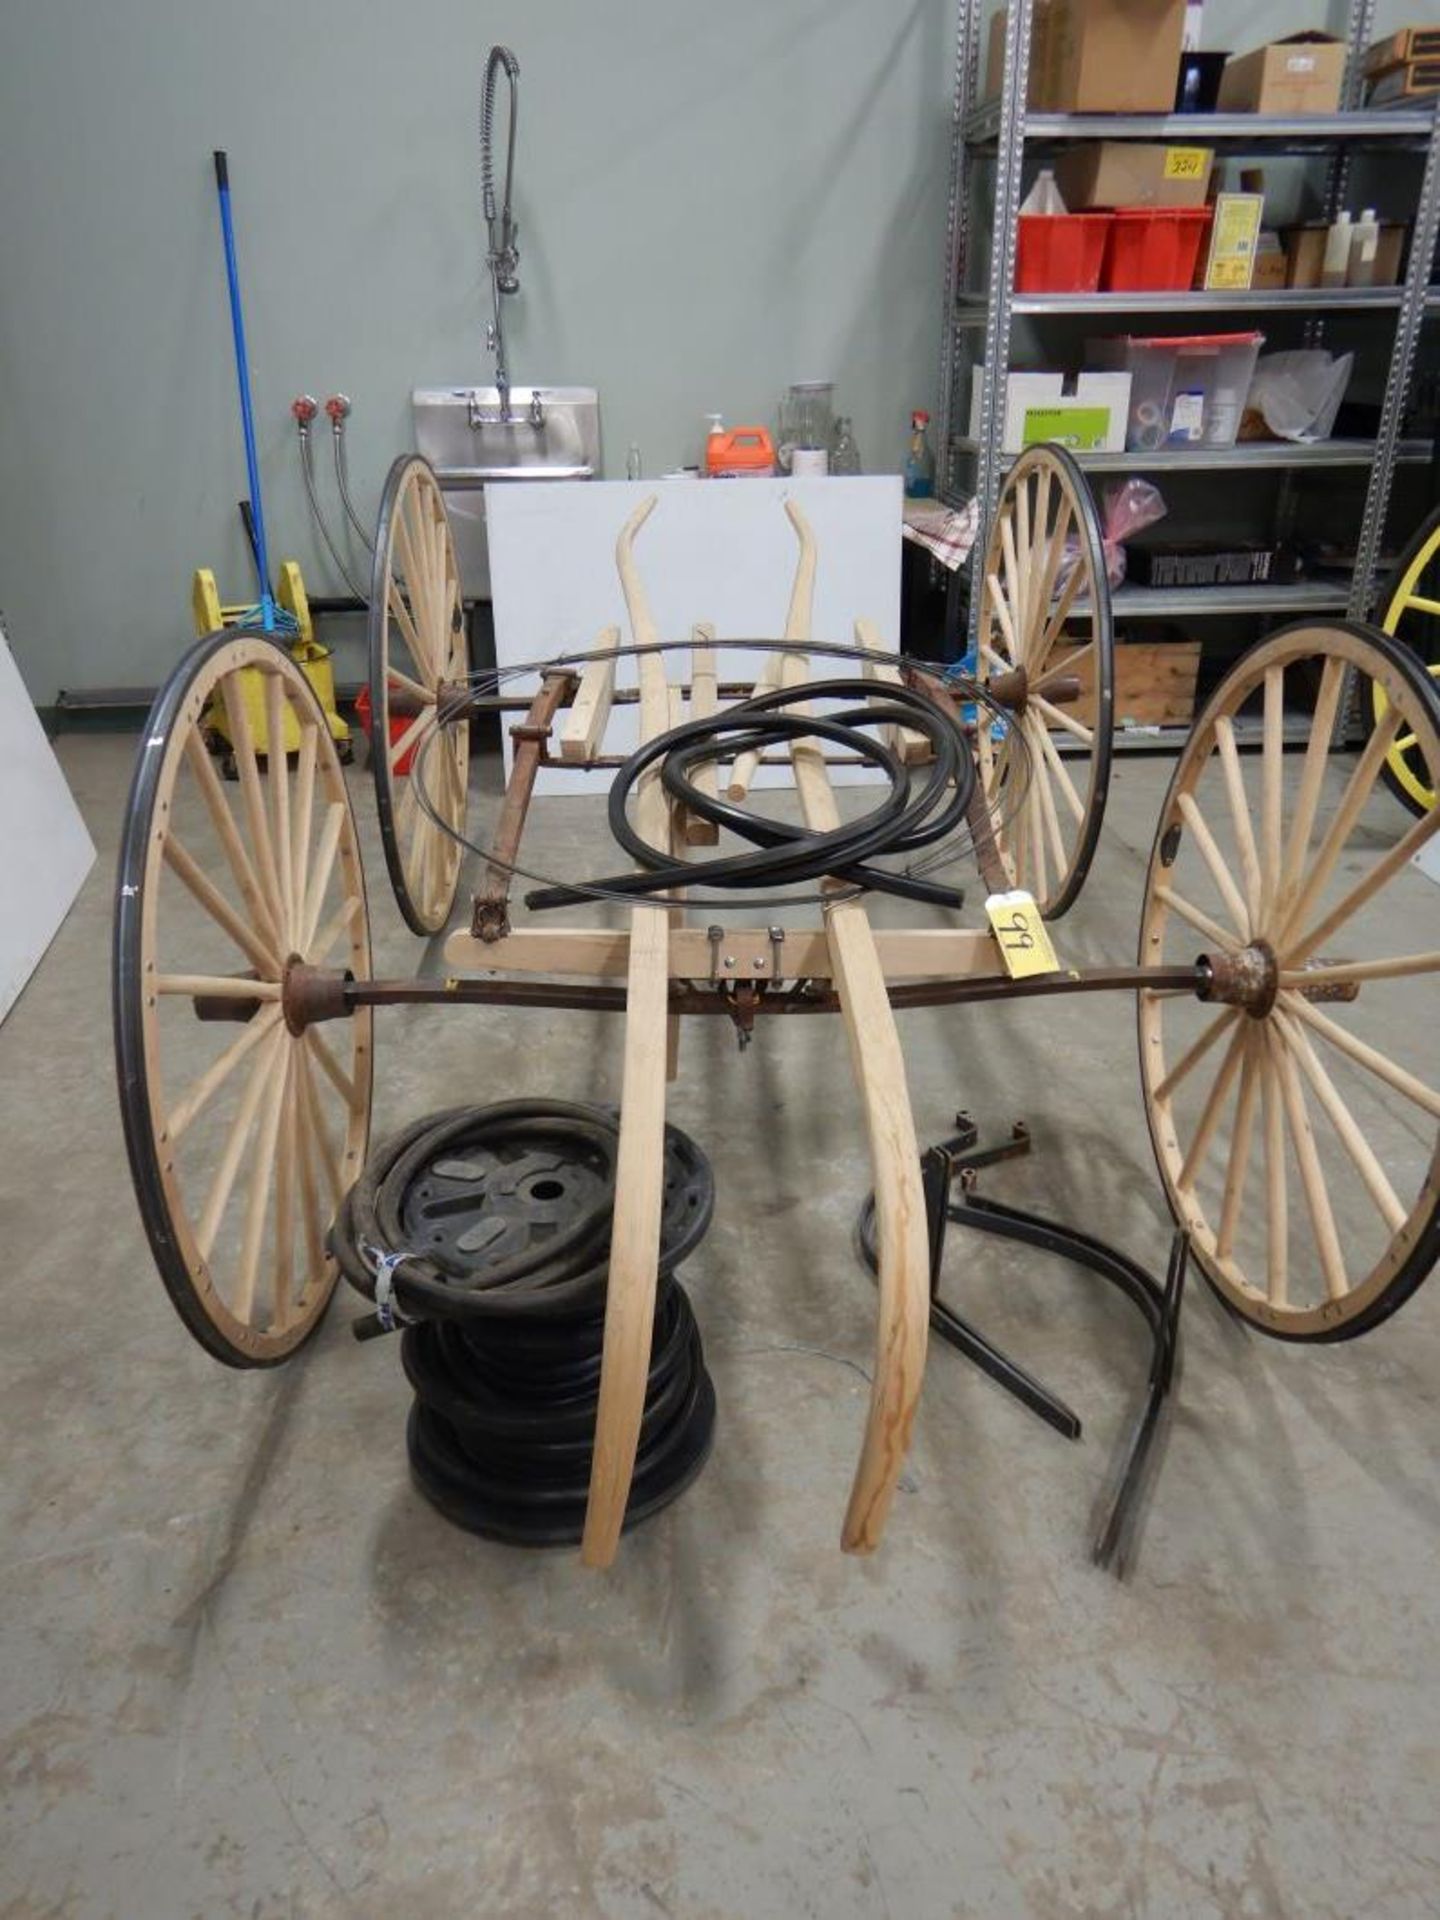 BUGGY FRAME & WHEELS W/RUBBER TIRE MATERIAL, INCOMPLETE RESTORATION BY JIM TRONNES - Image 3 of 3